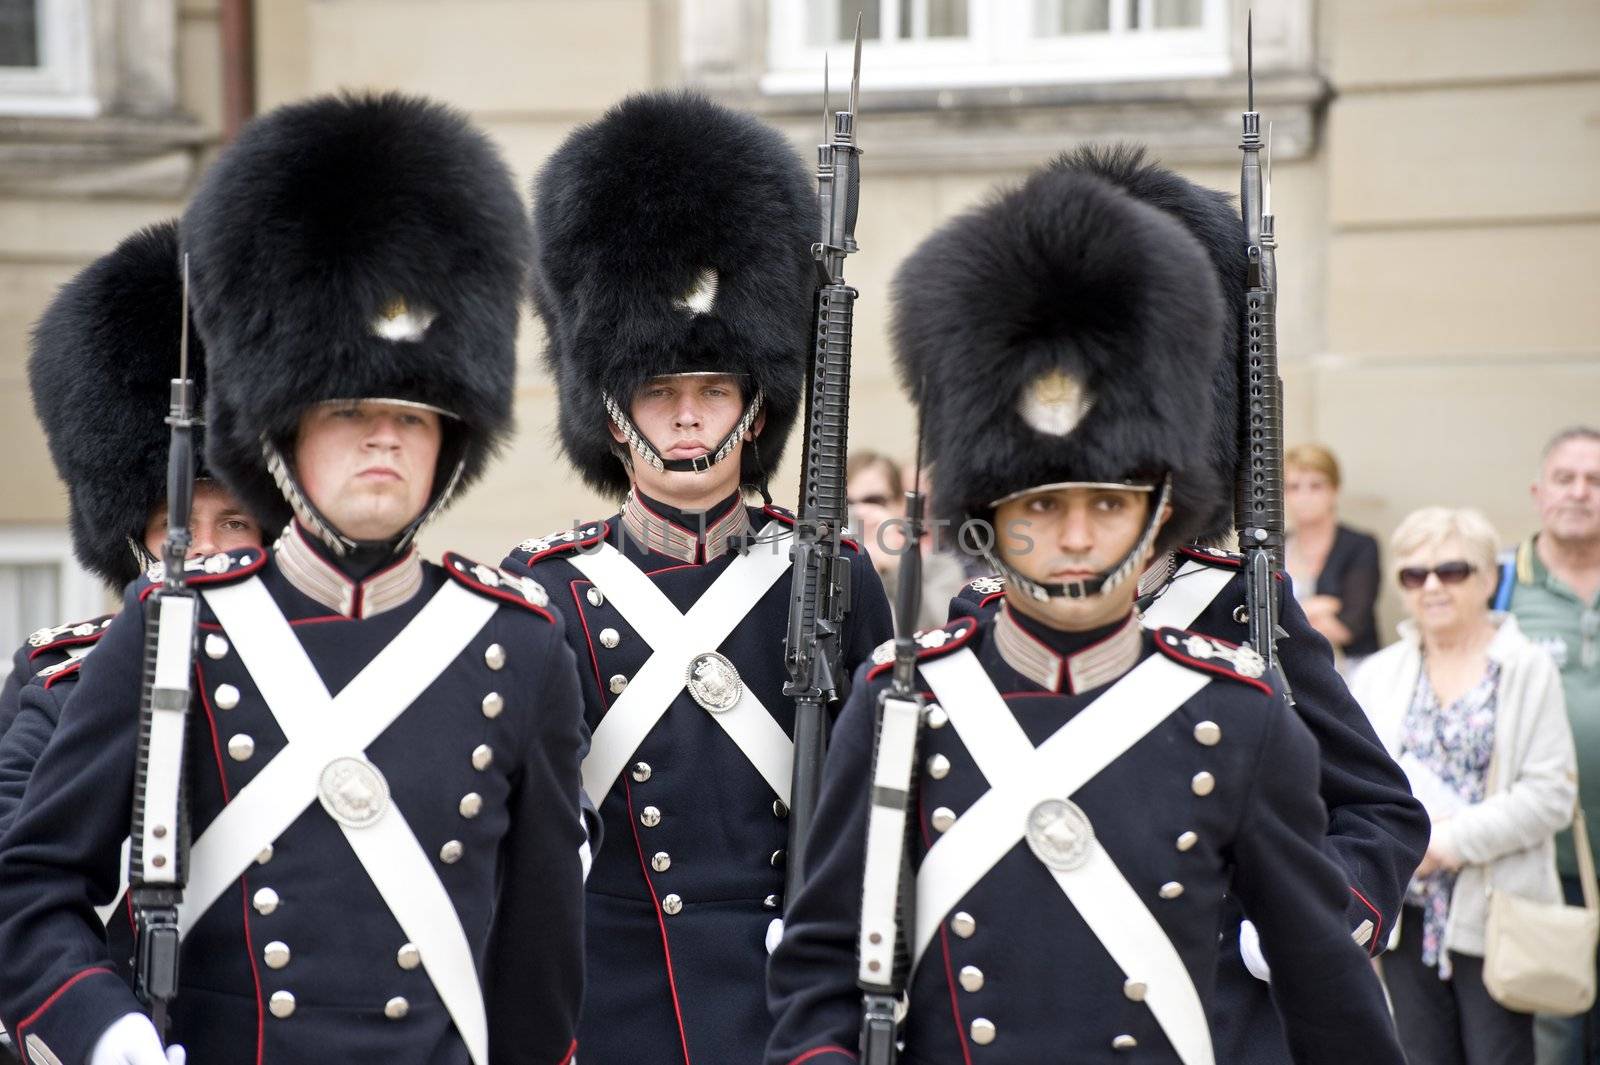 The Royal Danish Guard patrols the royal residence Amalienborg Palace and serves the royal Danish family. Amalienborg is also known for the Danish Royal Guard, who patrol the palace grounds. The Danish Royal Guard march from Rosenborg Castle at 11.30am daily through the streets of Copenhagen, and execute the changing of the guard in front of Amalienborg Palace at noon. When the Queen is in reside